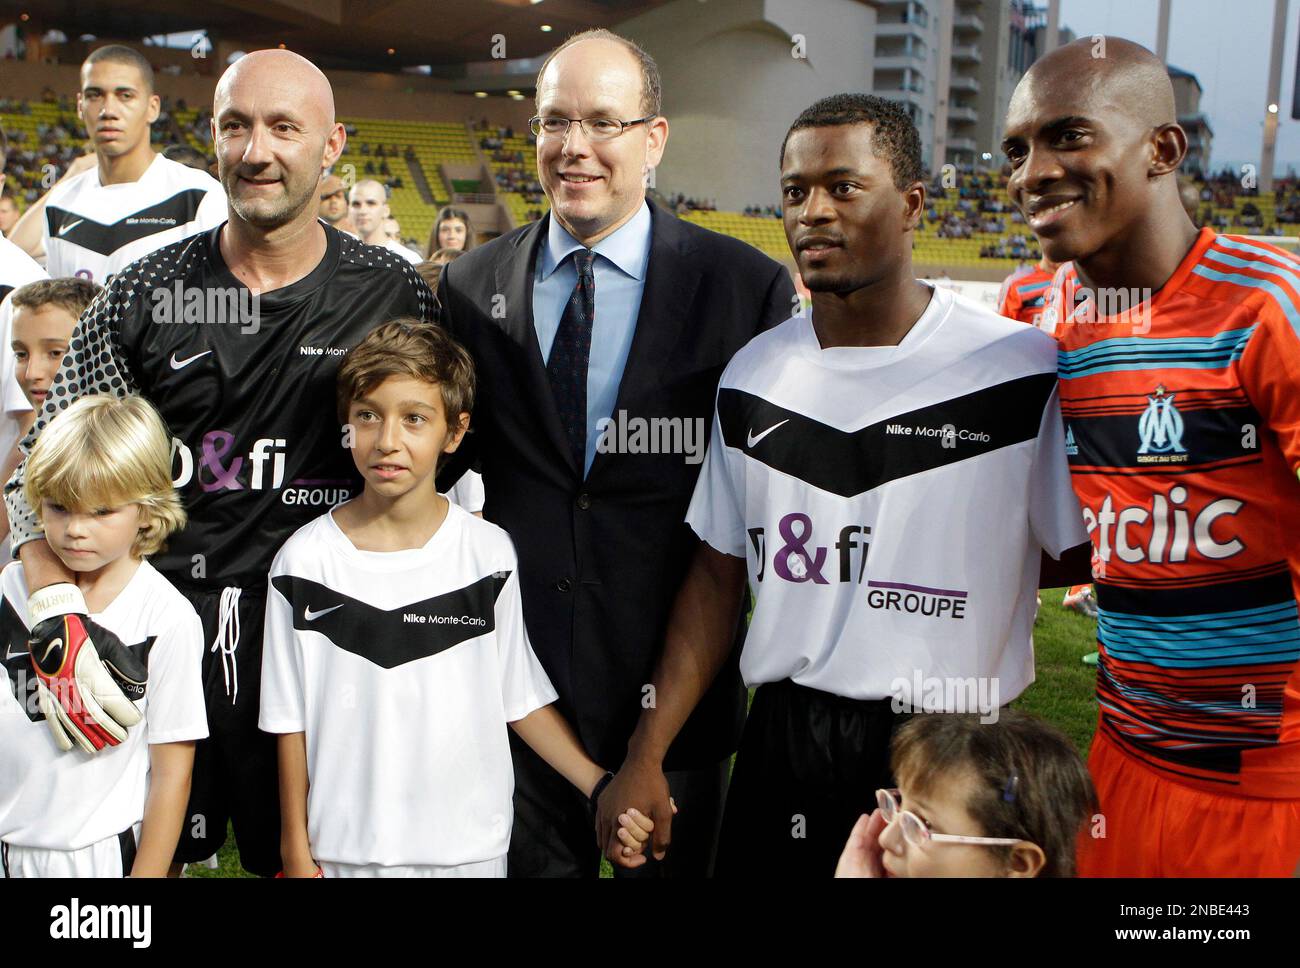 Prince Albert II of Monaco, poses with former goalkeeper Fabien Barthez of France, left, Manchester United player Patrice Evra, second from right, and Marseille player Charles Kabore before a charity match between Olympique Marseille soccer team and a Manchester United team Tuesday, Aug. 2, 2011, in Monaco stadium. (AP Photo/Lionel Cironneau) Stock Photo